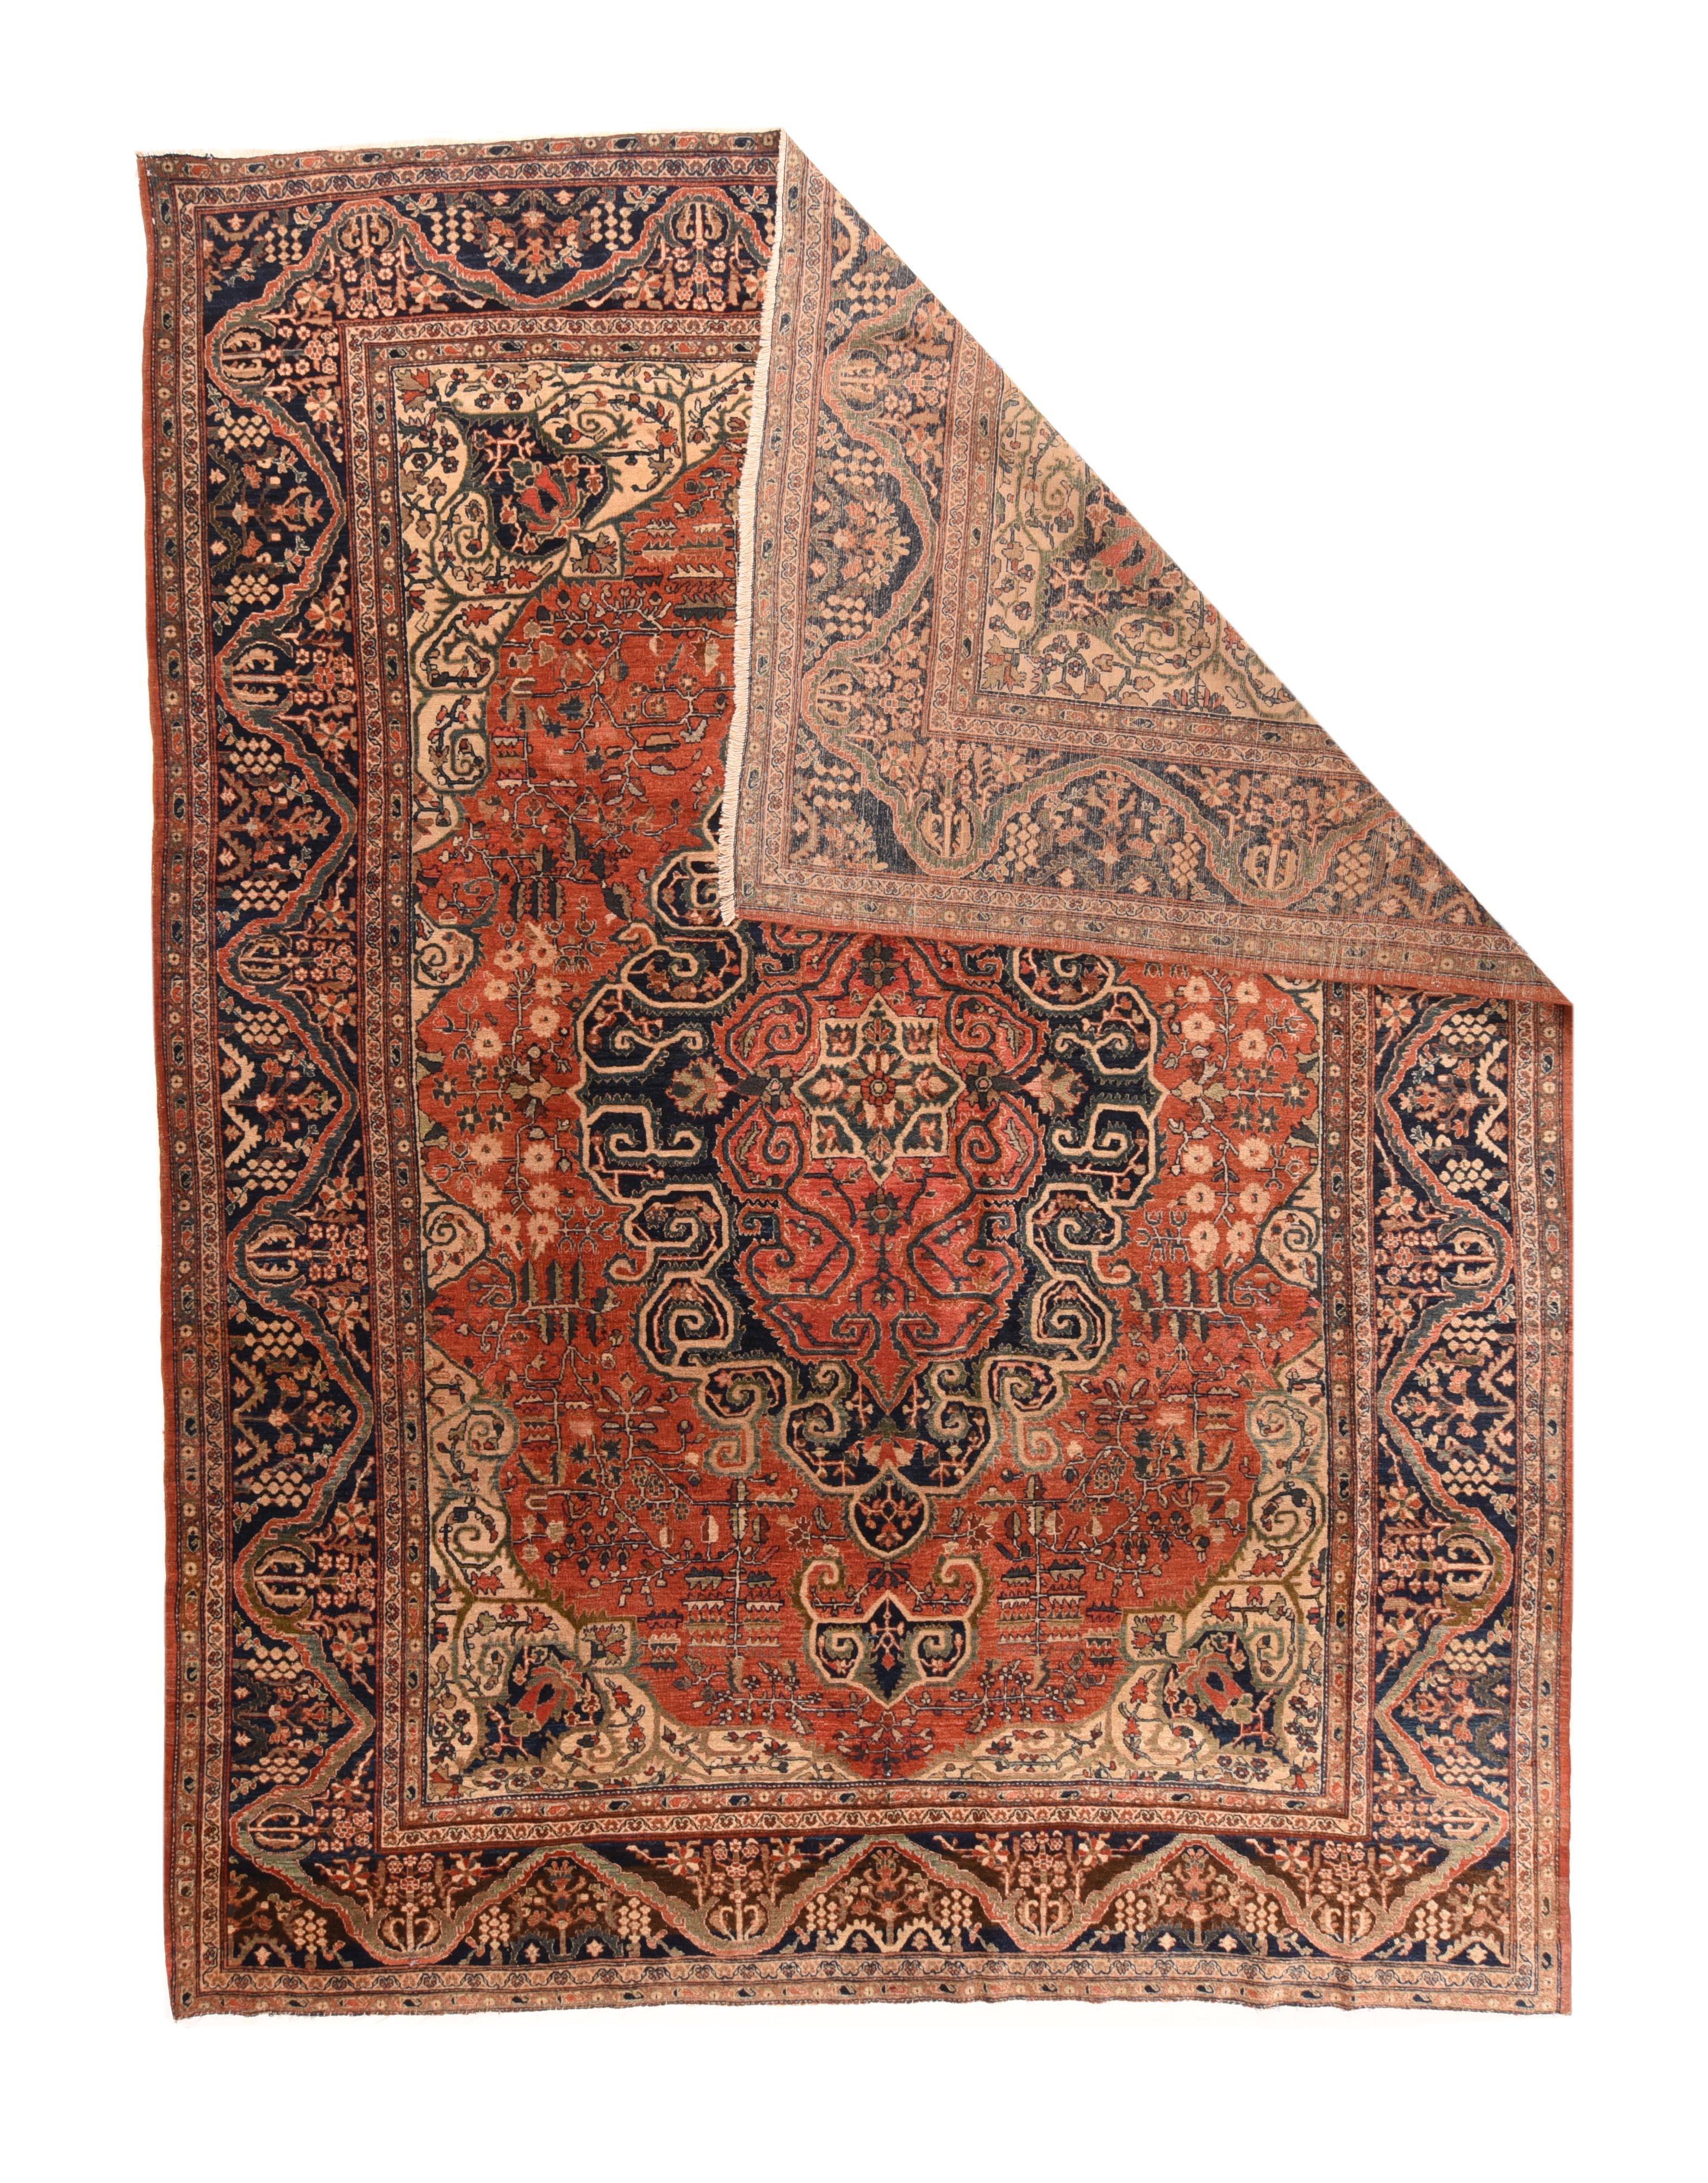 Antique Farahan Sarouk Rug 8'6'' x 11'. Classic palette with a rust madder field, navy indigo medallion and pendants with rigorous volute edging and ecru corners with angled navy vasiform elements and attendant angular volutes. Four flowers with